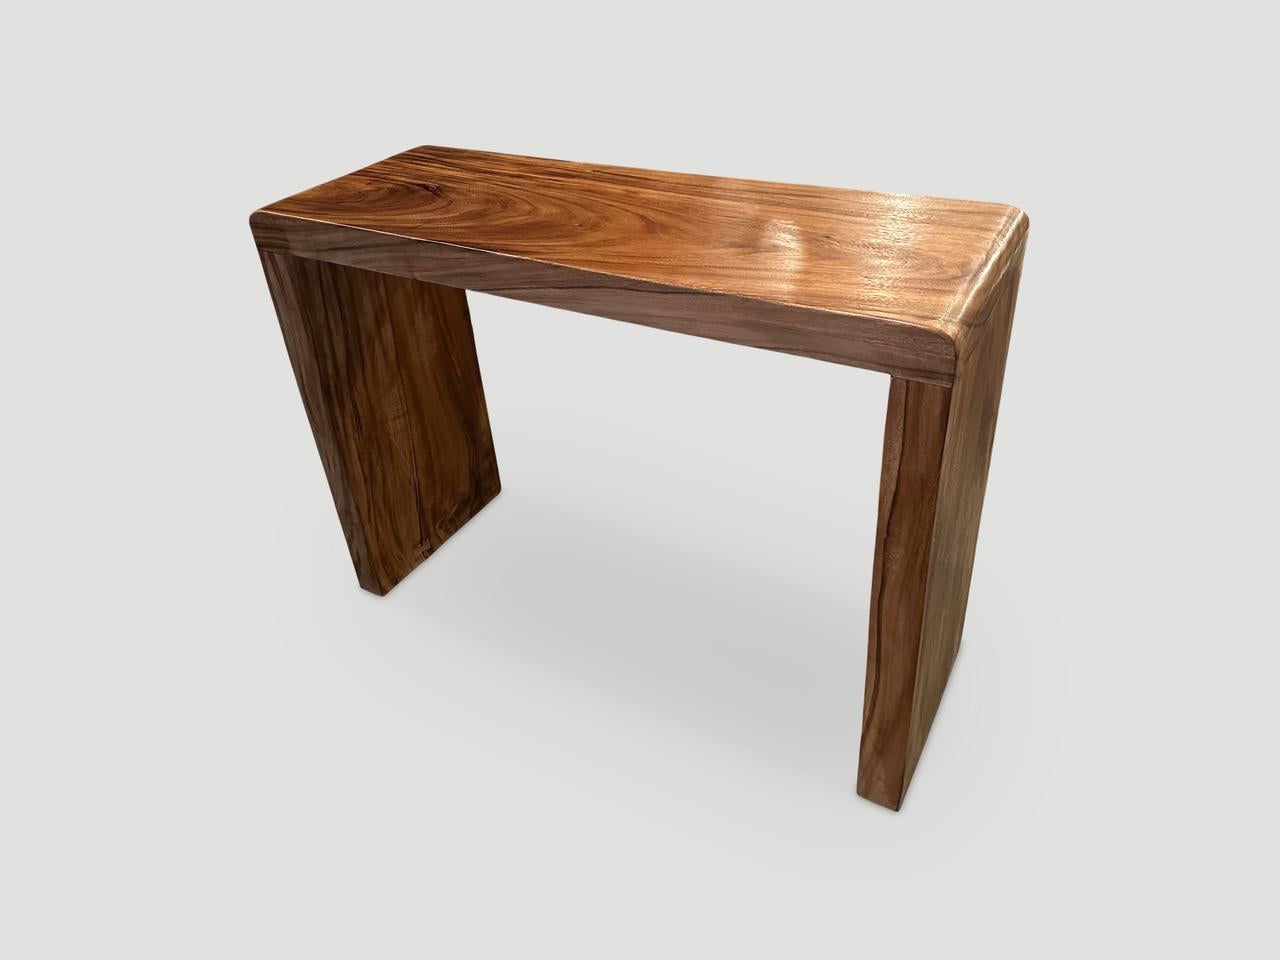 Andrianna Shamaris Minimalist Suar Wood Console Table In Excellent Condition For Sale In New York, NY